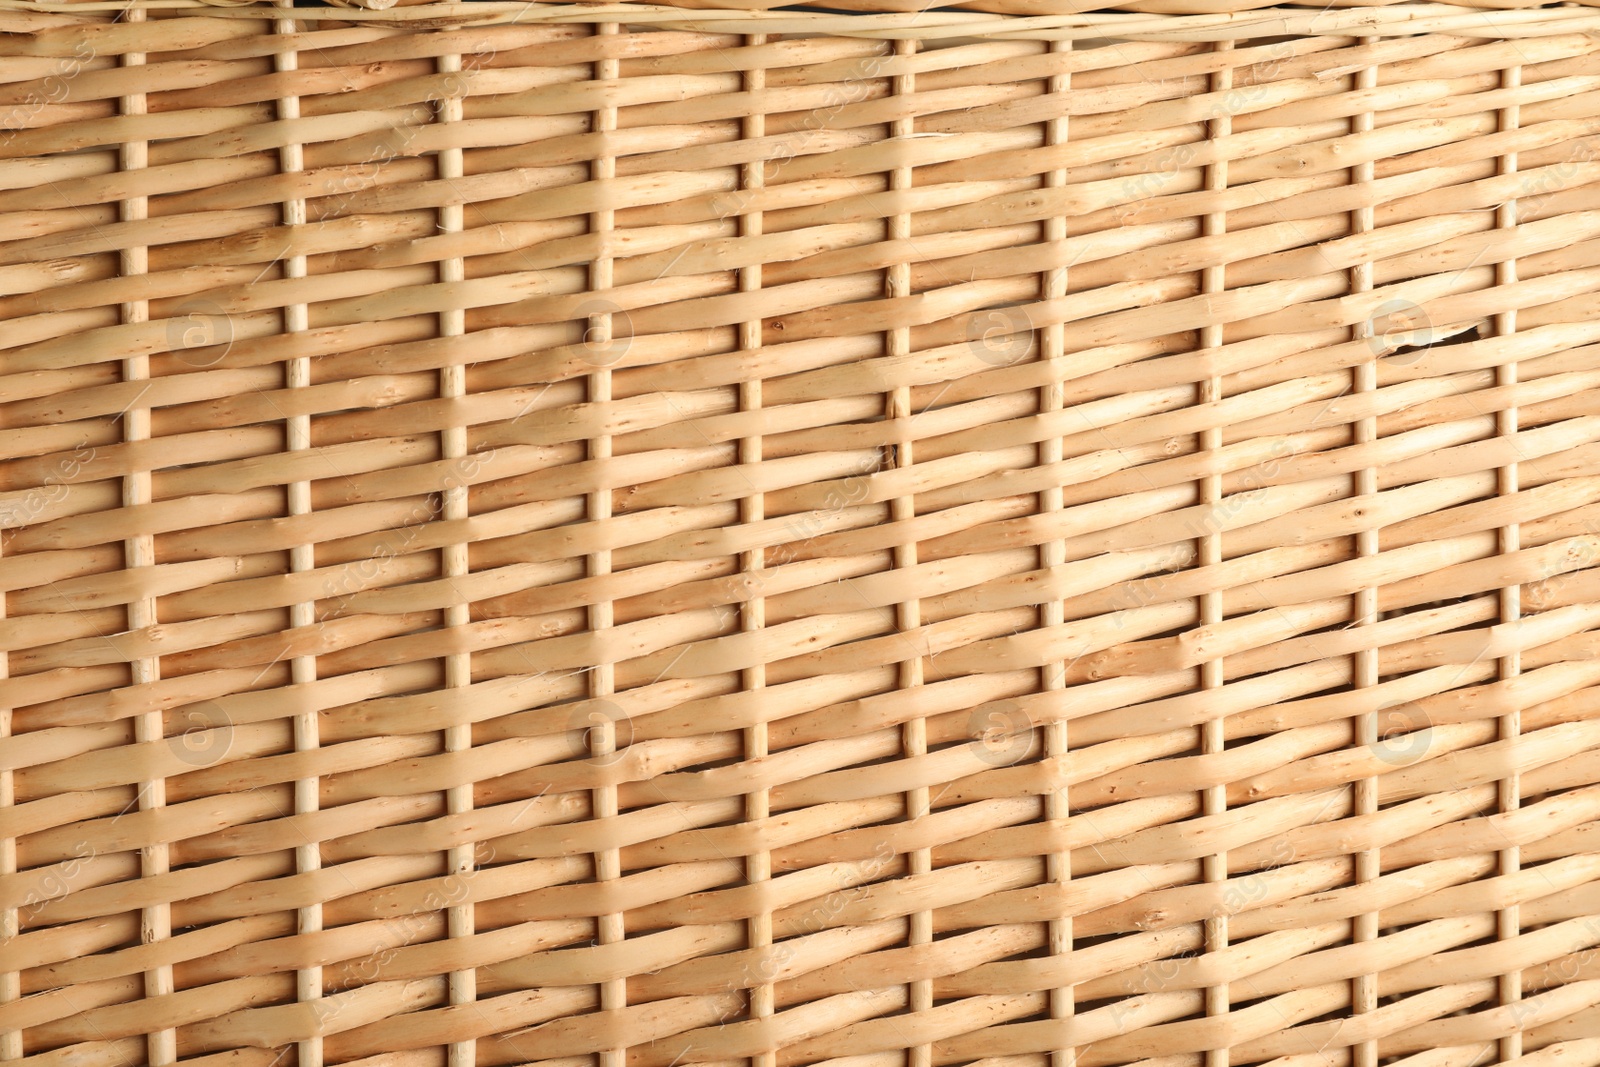 Photo of Handmade wicker basket made of natural material as background, closeup view